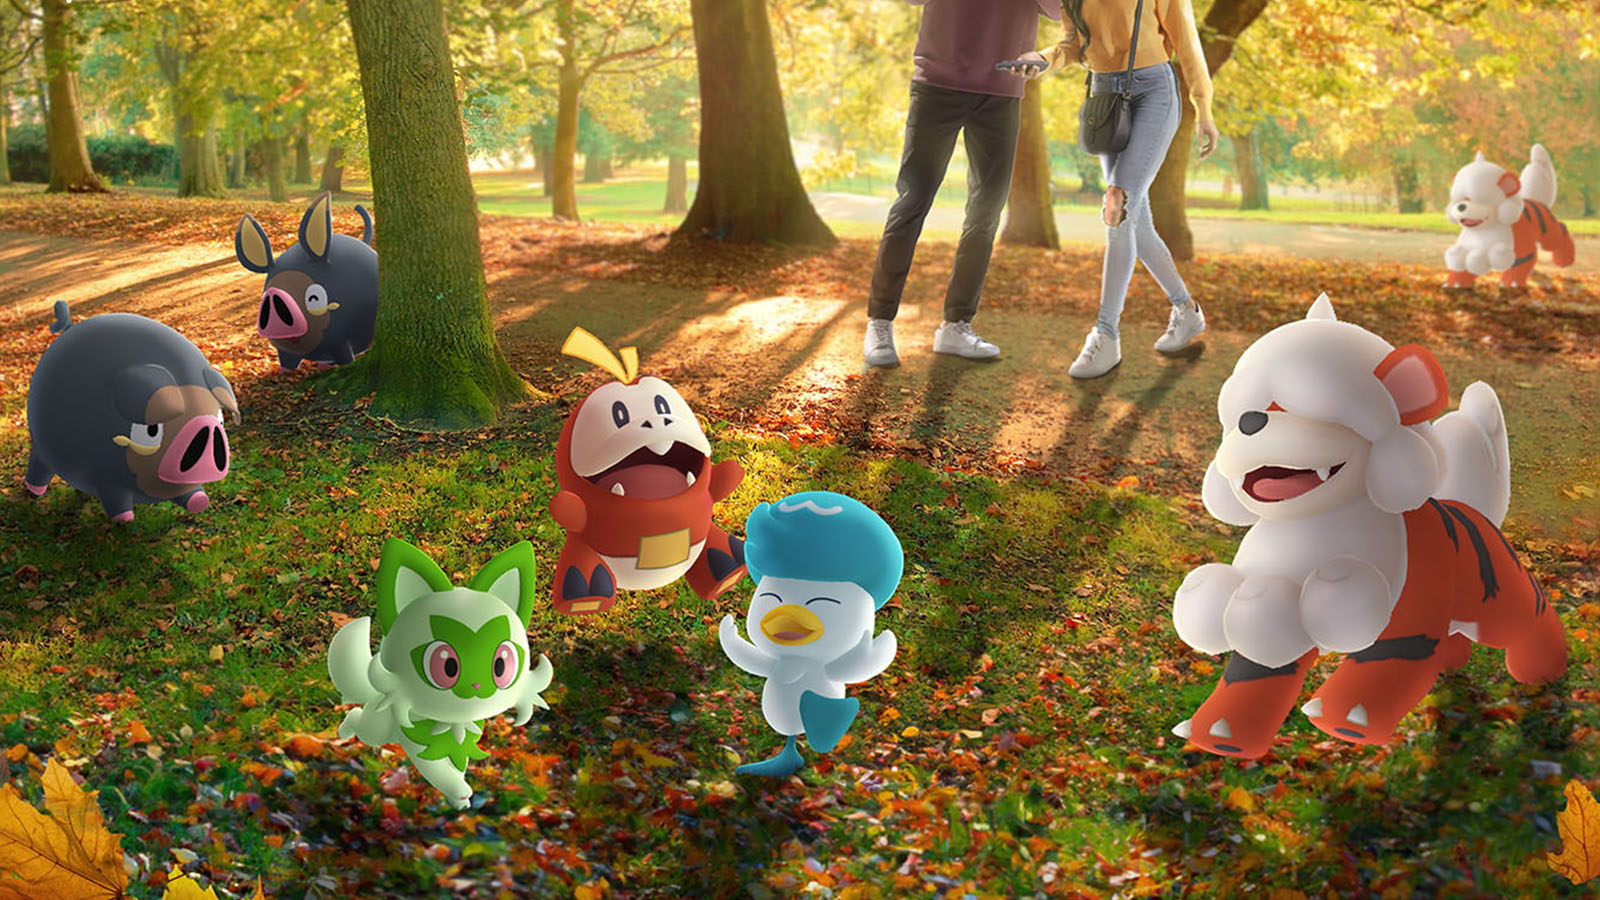 Pokemon Go Travel is a new event that will spawn Farfetch'd